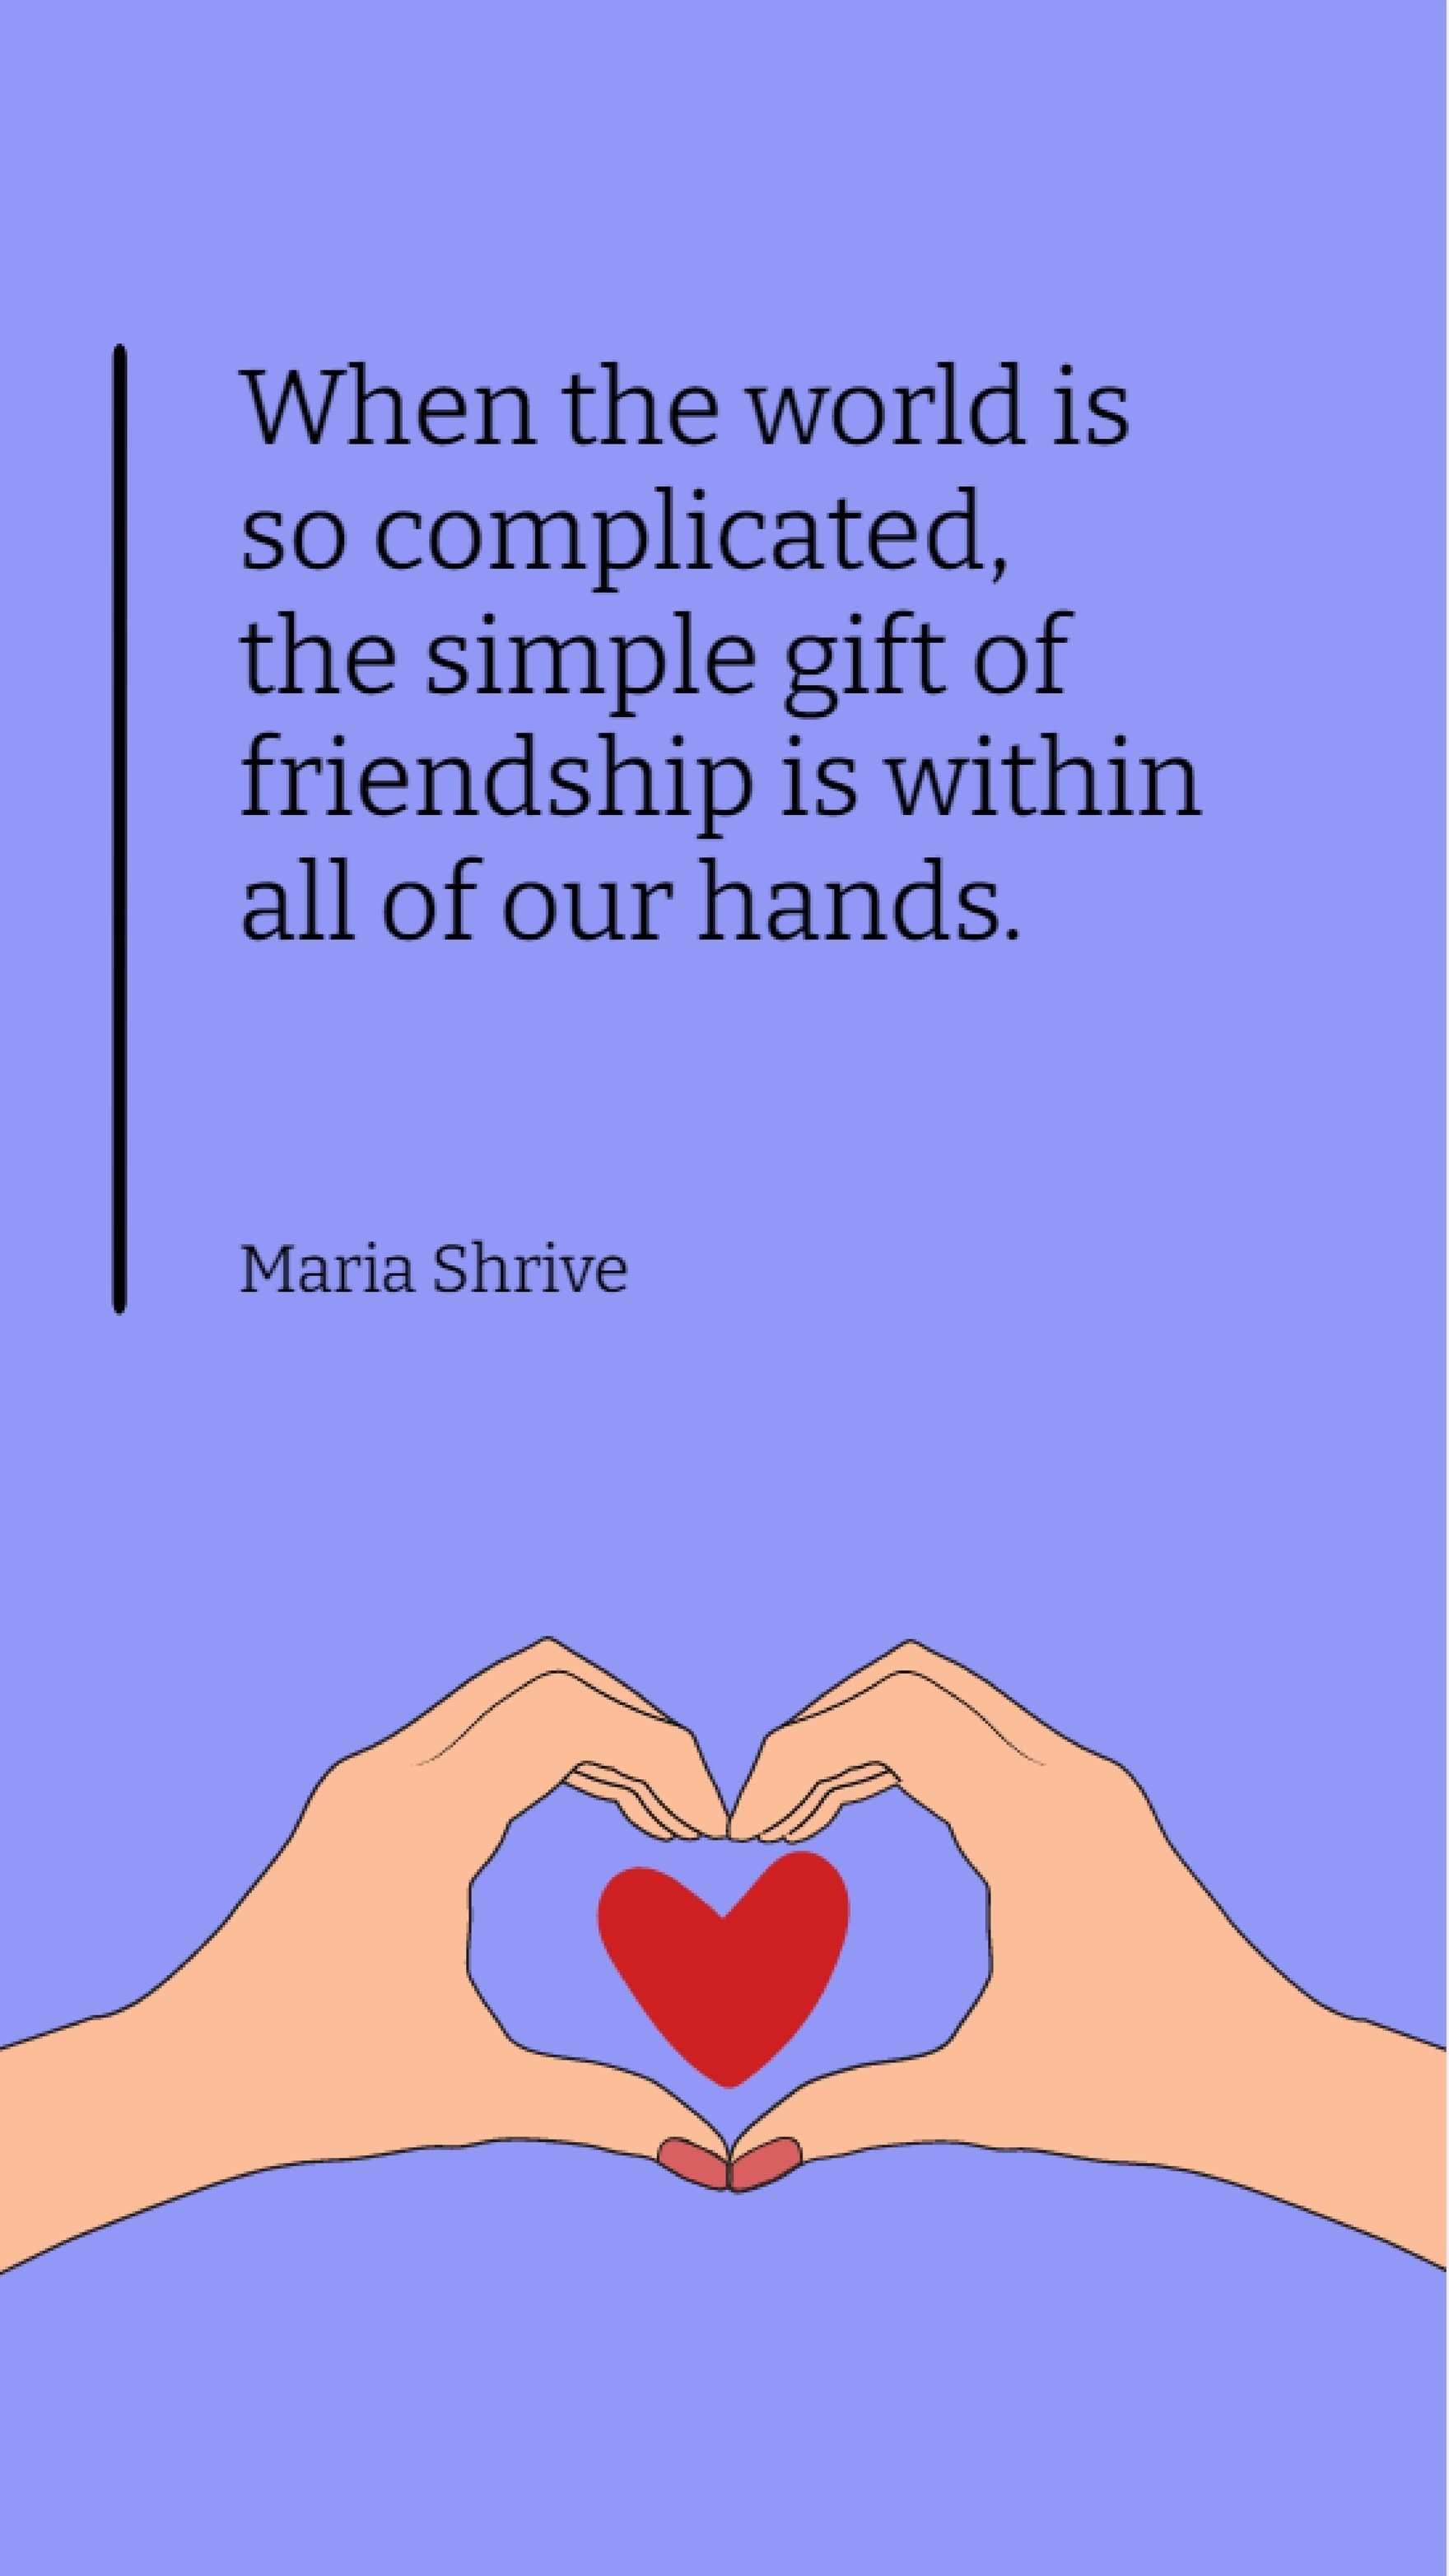 Maria Shrive - When the world is so complicated, the simple gift of friendship is within all of our hands. Template